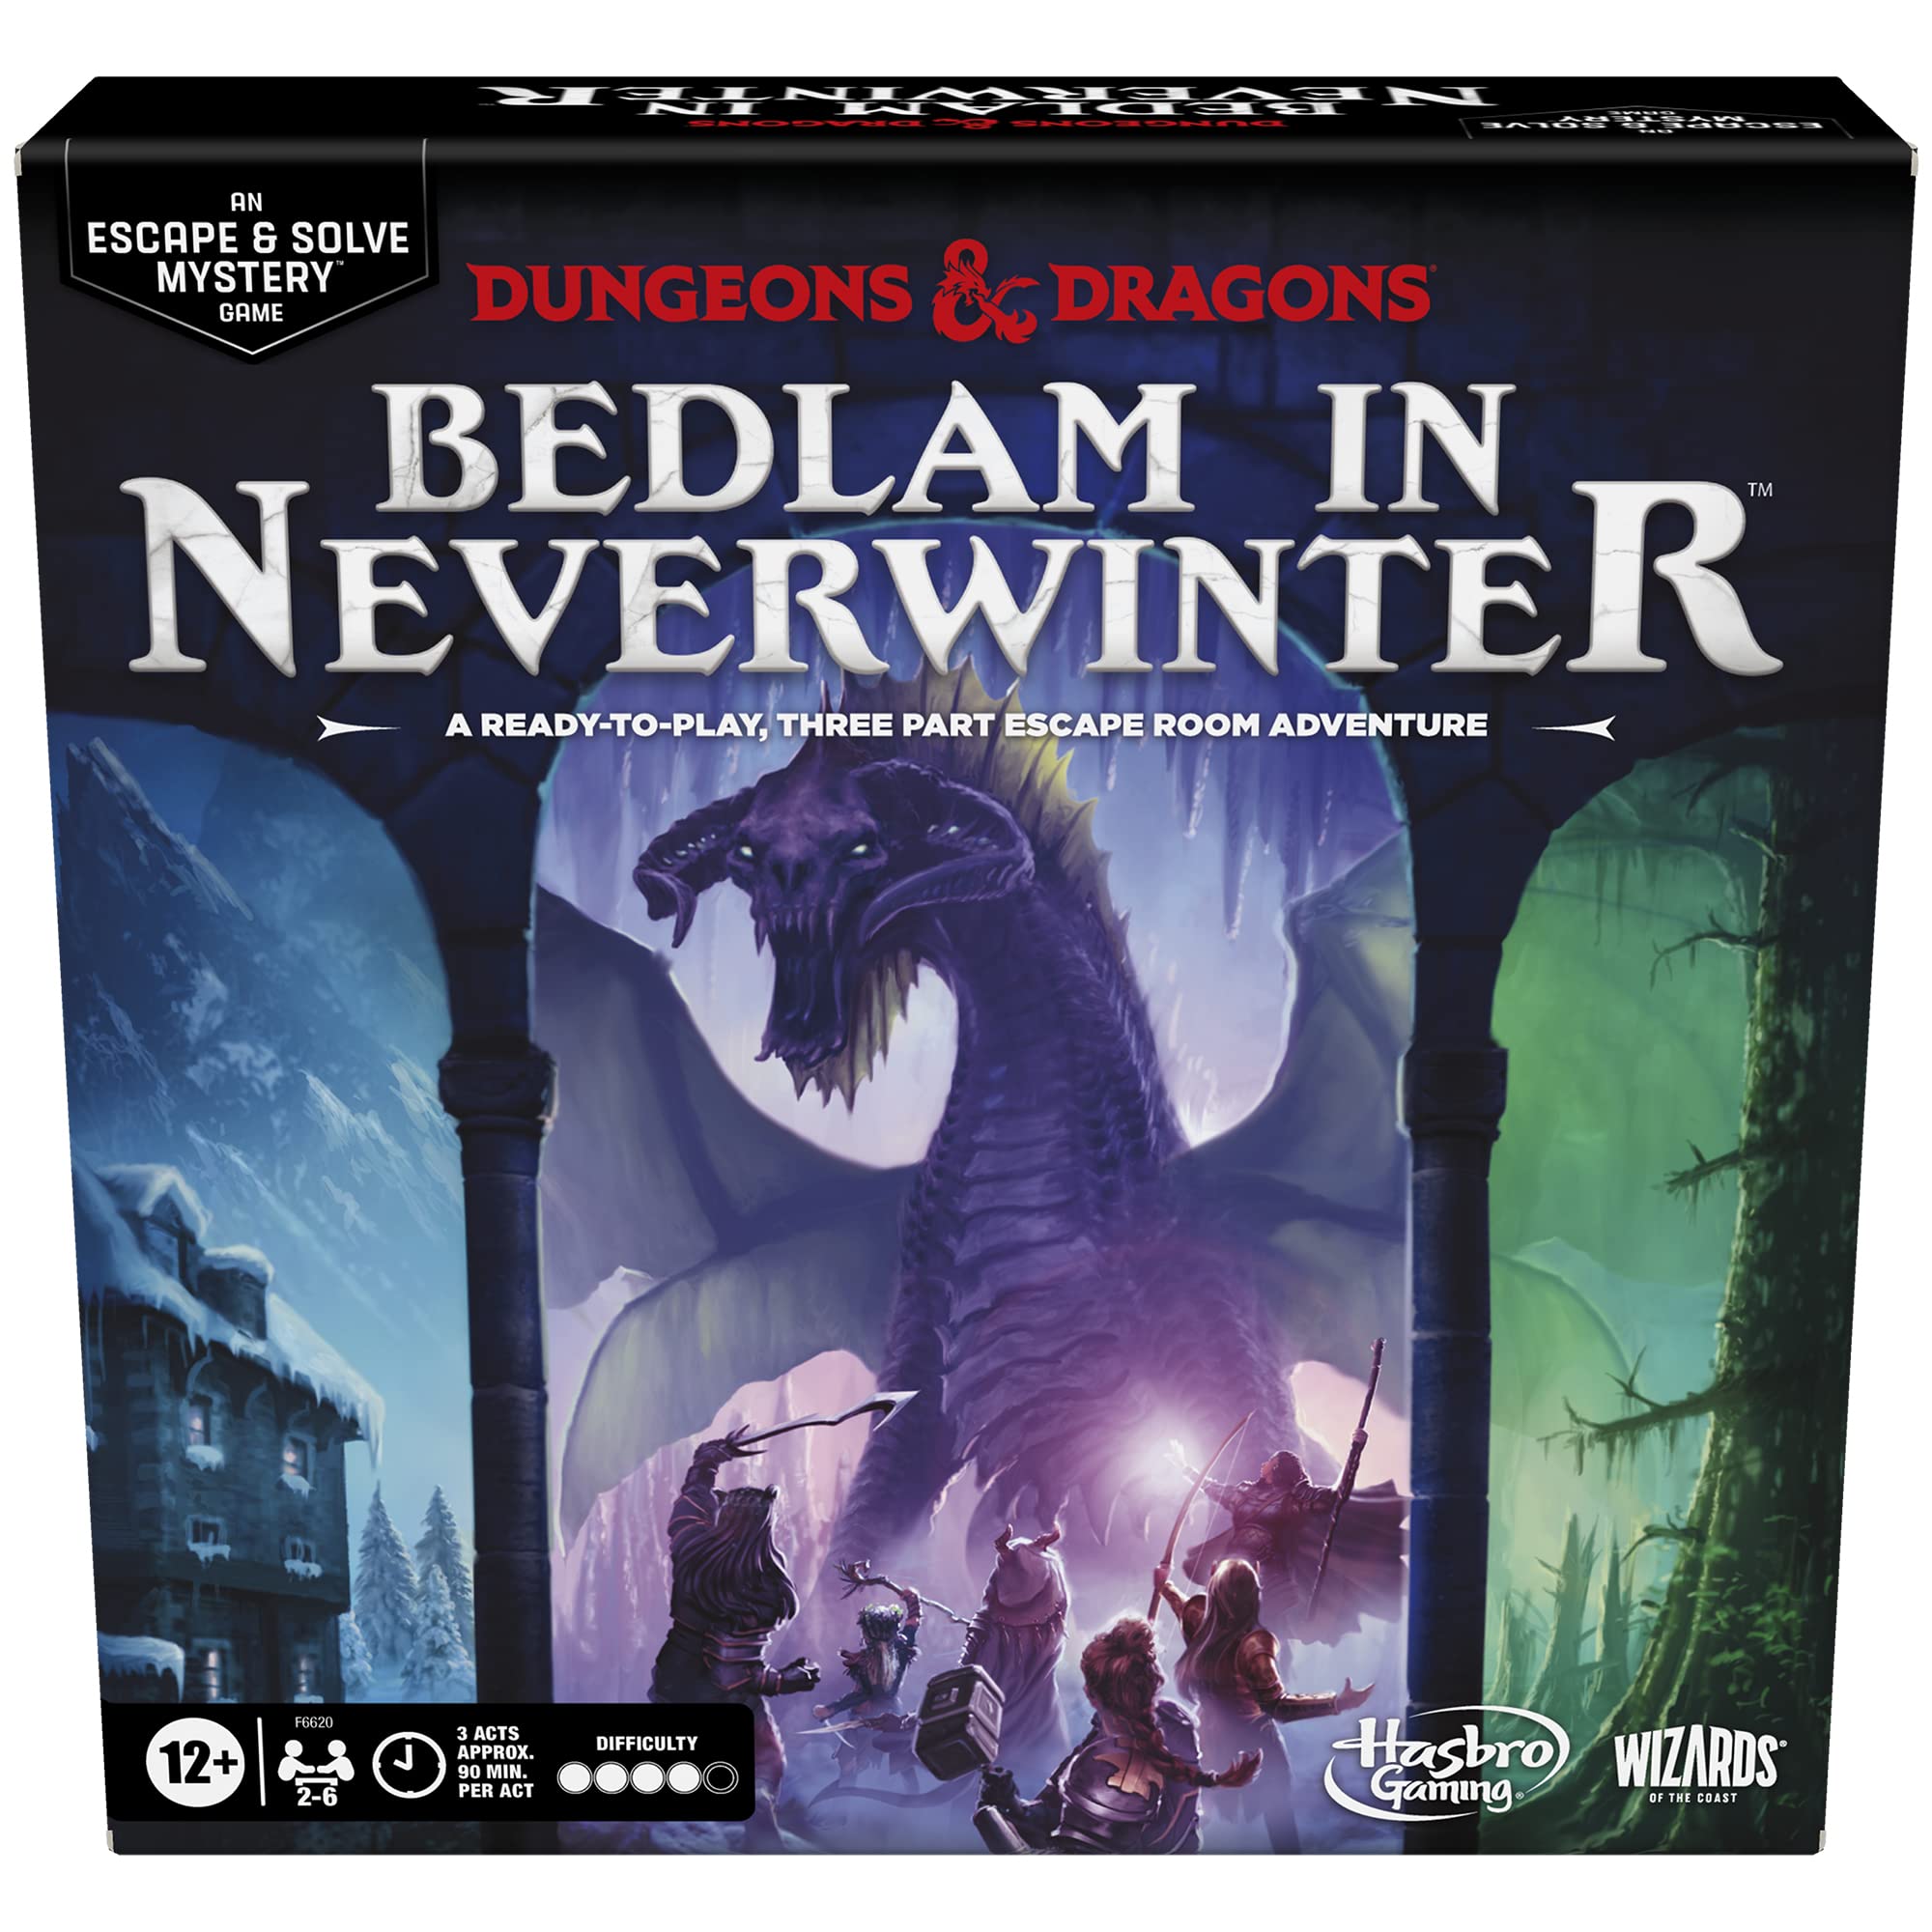 Dungeons & Dragons: Bedlam in Neverwinter, Escape Room, Cooperative Board Games for Ages 12+, 2-6 Players, 3 Acts Approx. 90 Mins. Each